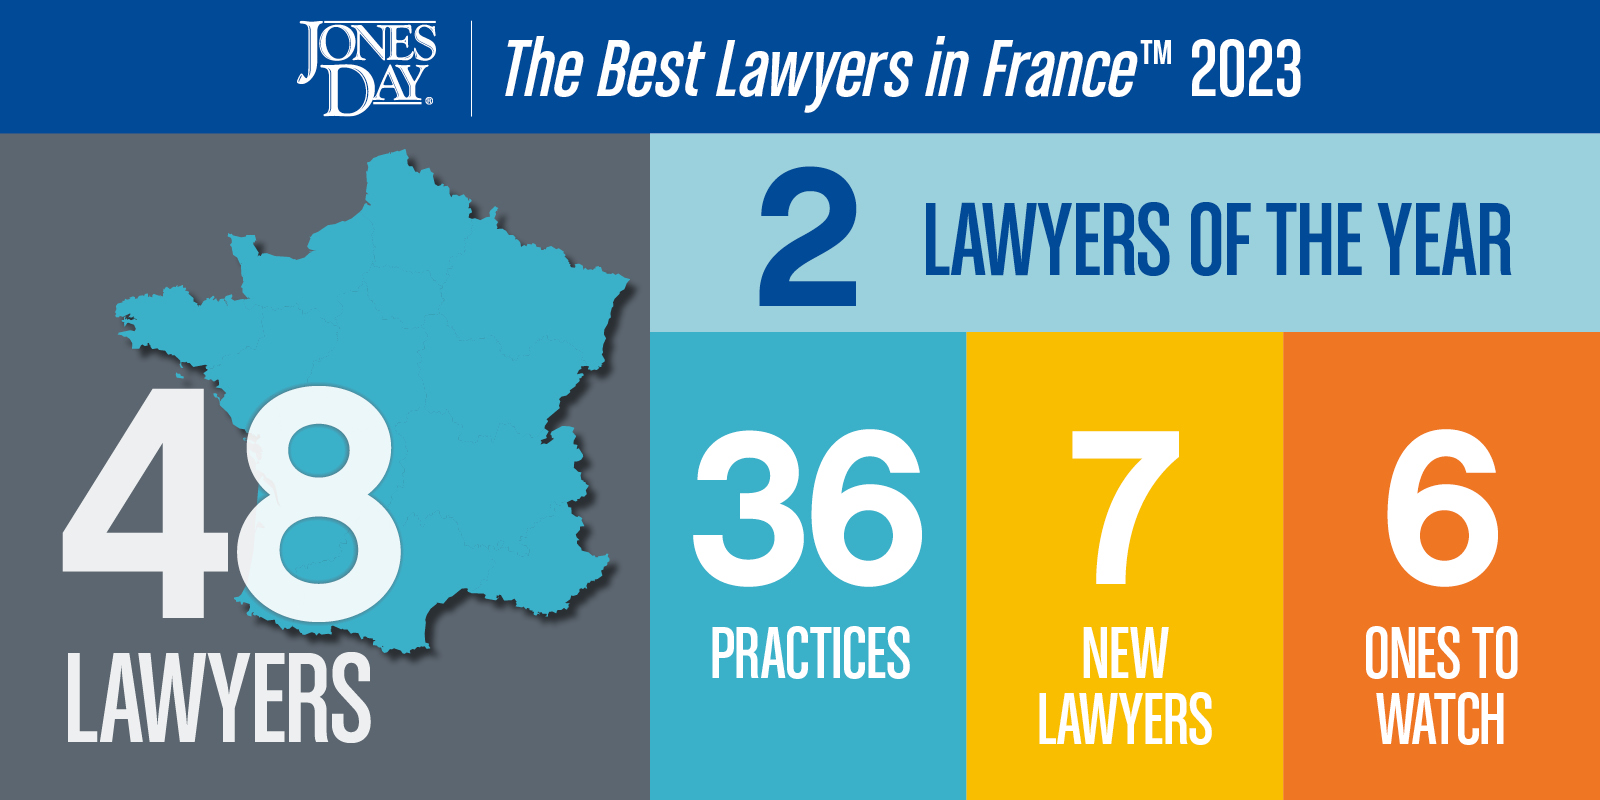 The Best Lawyers in France 2022